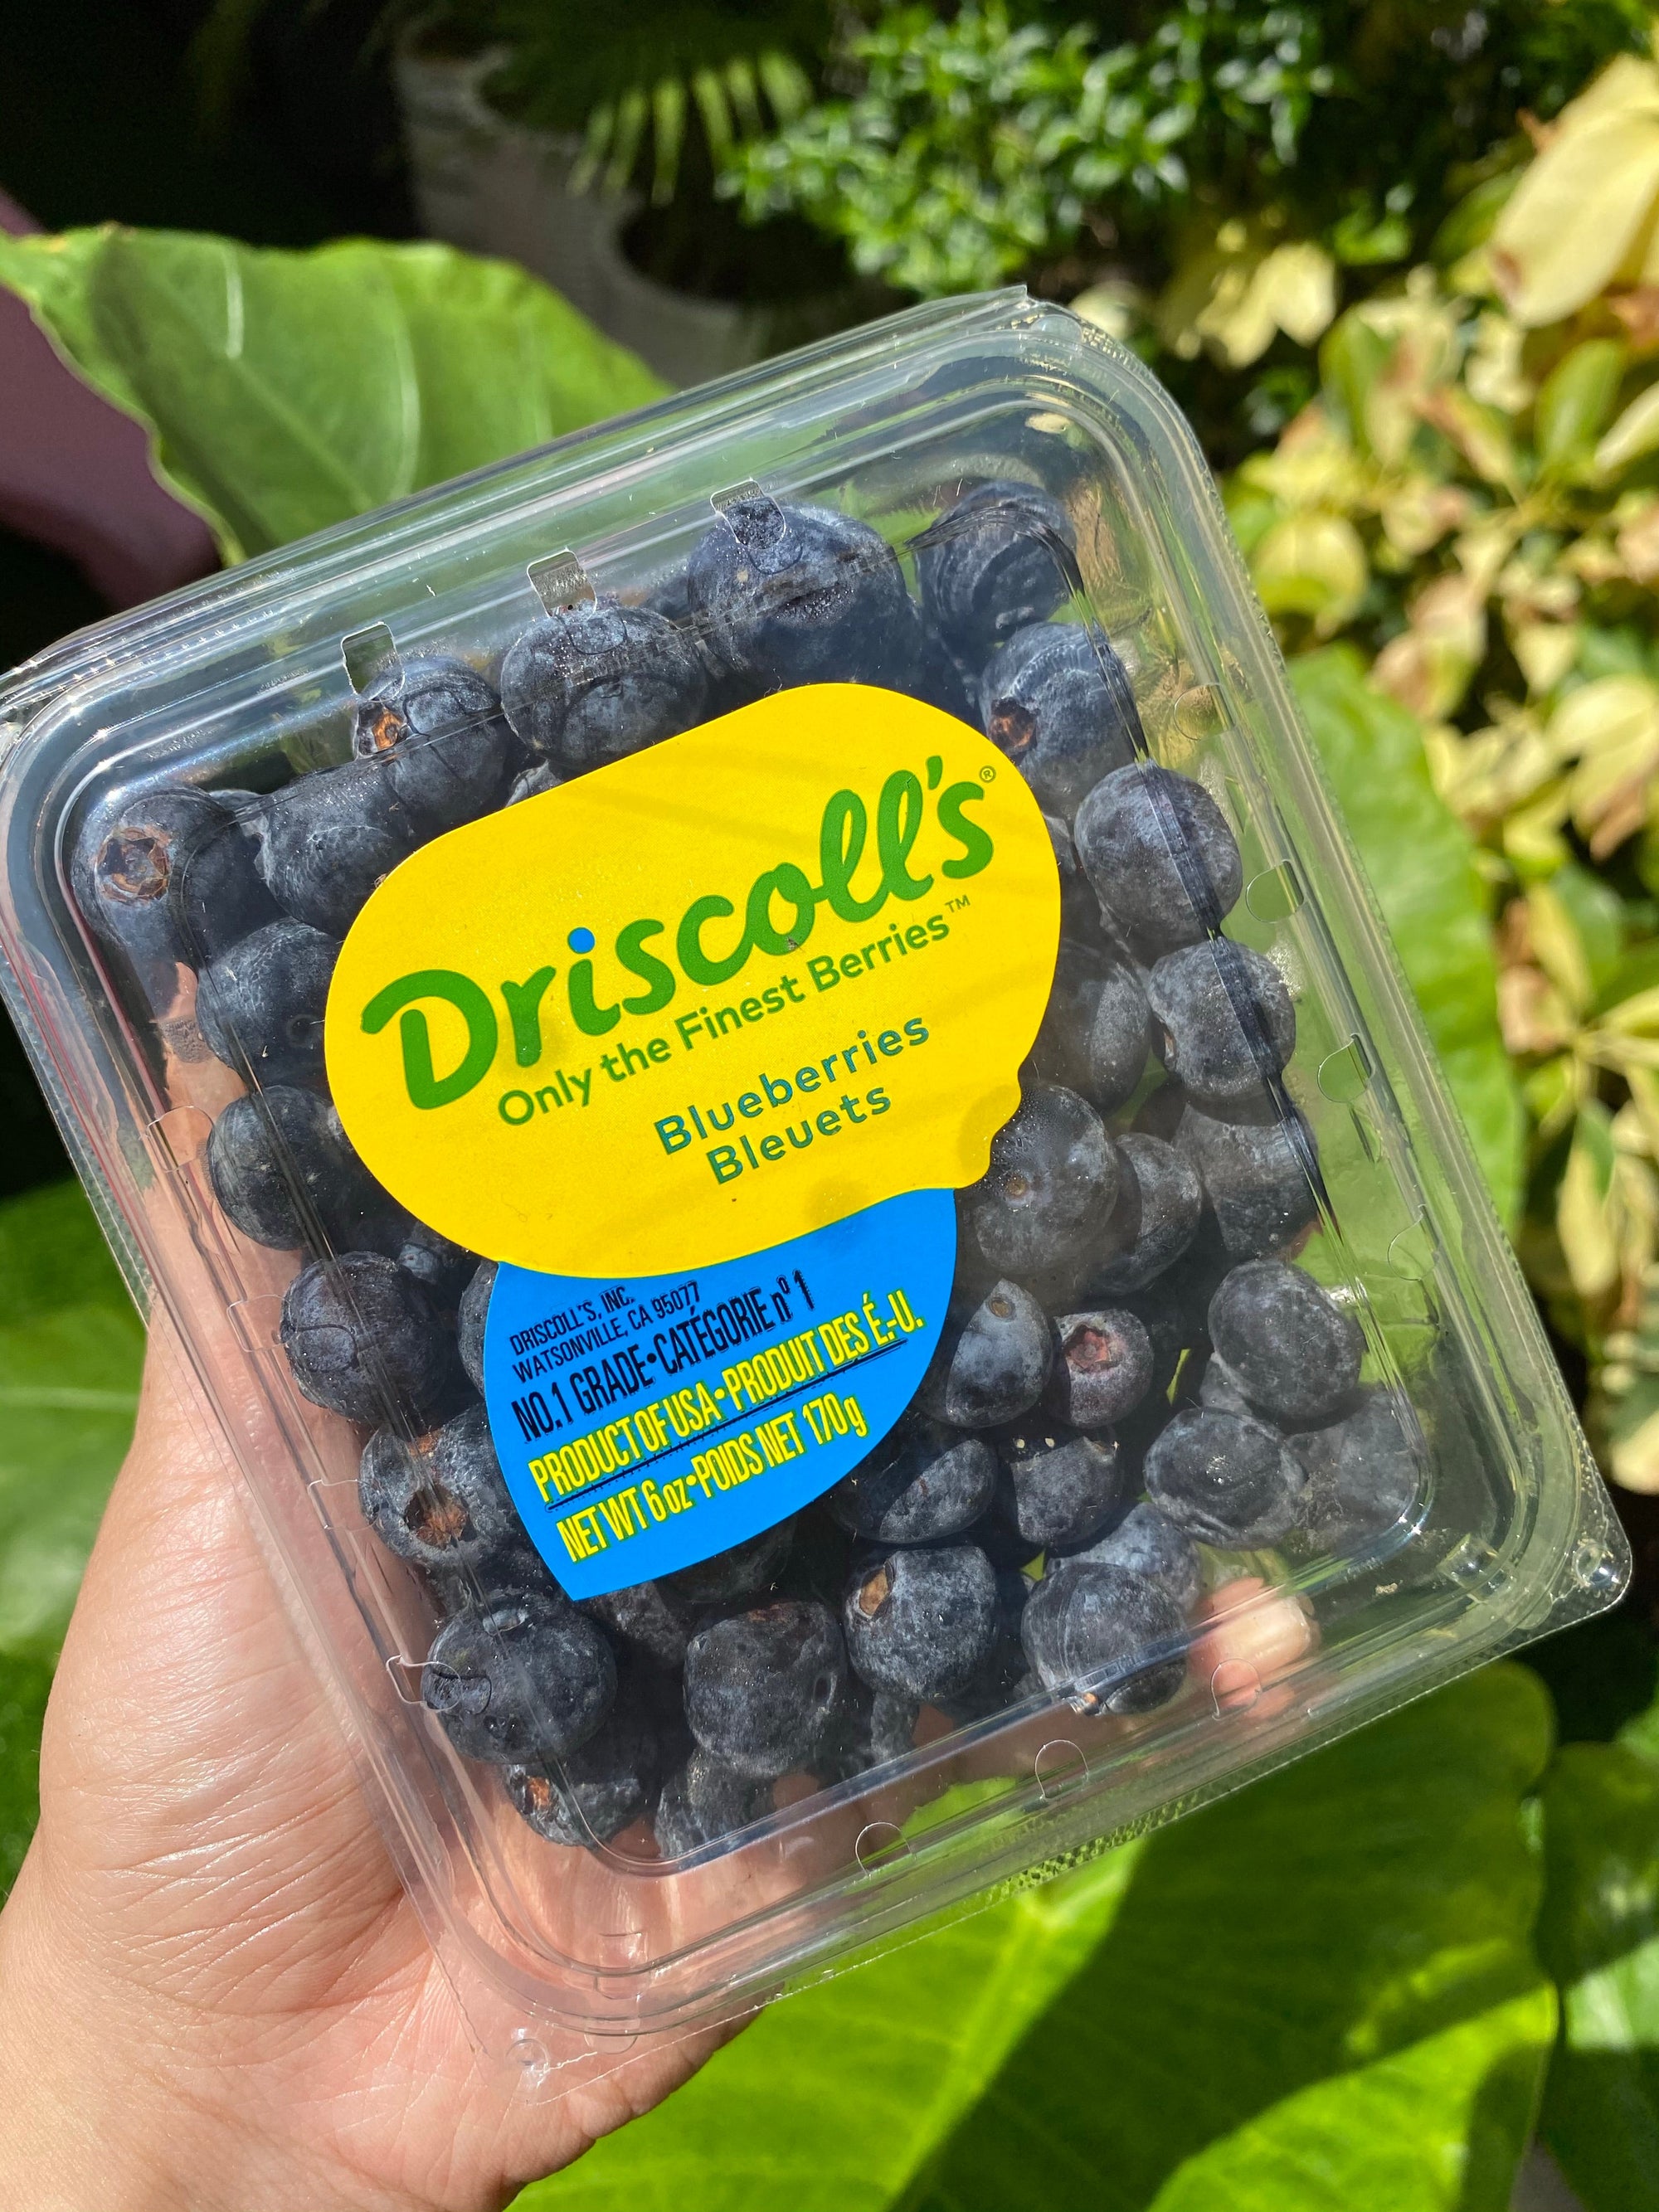 US Driscoll's Blueberries